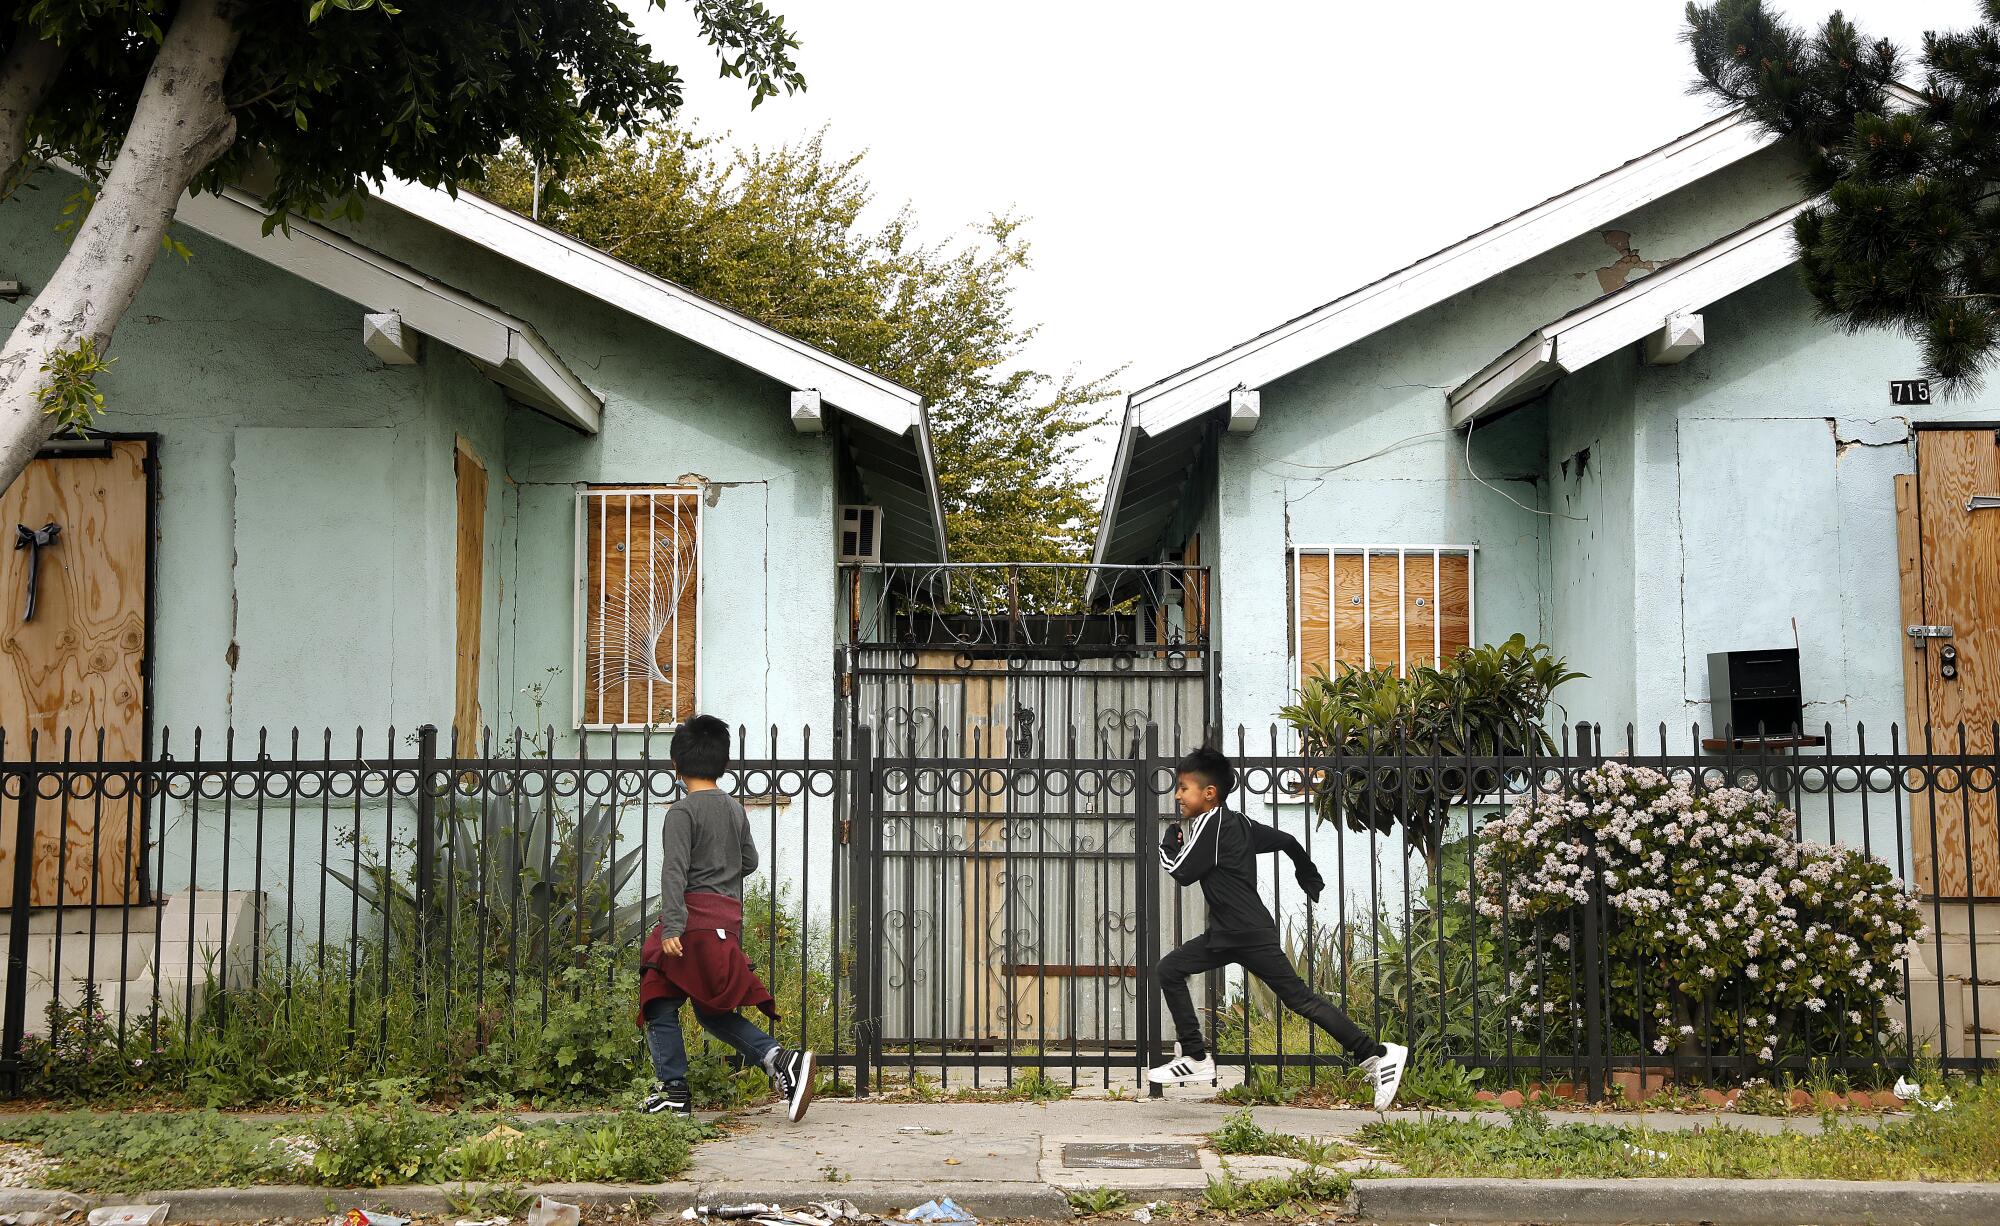 Children run past boarded-up homes.